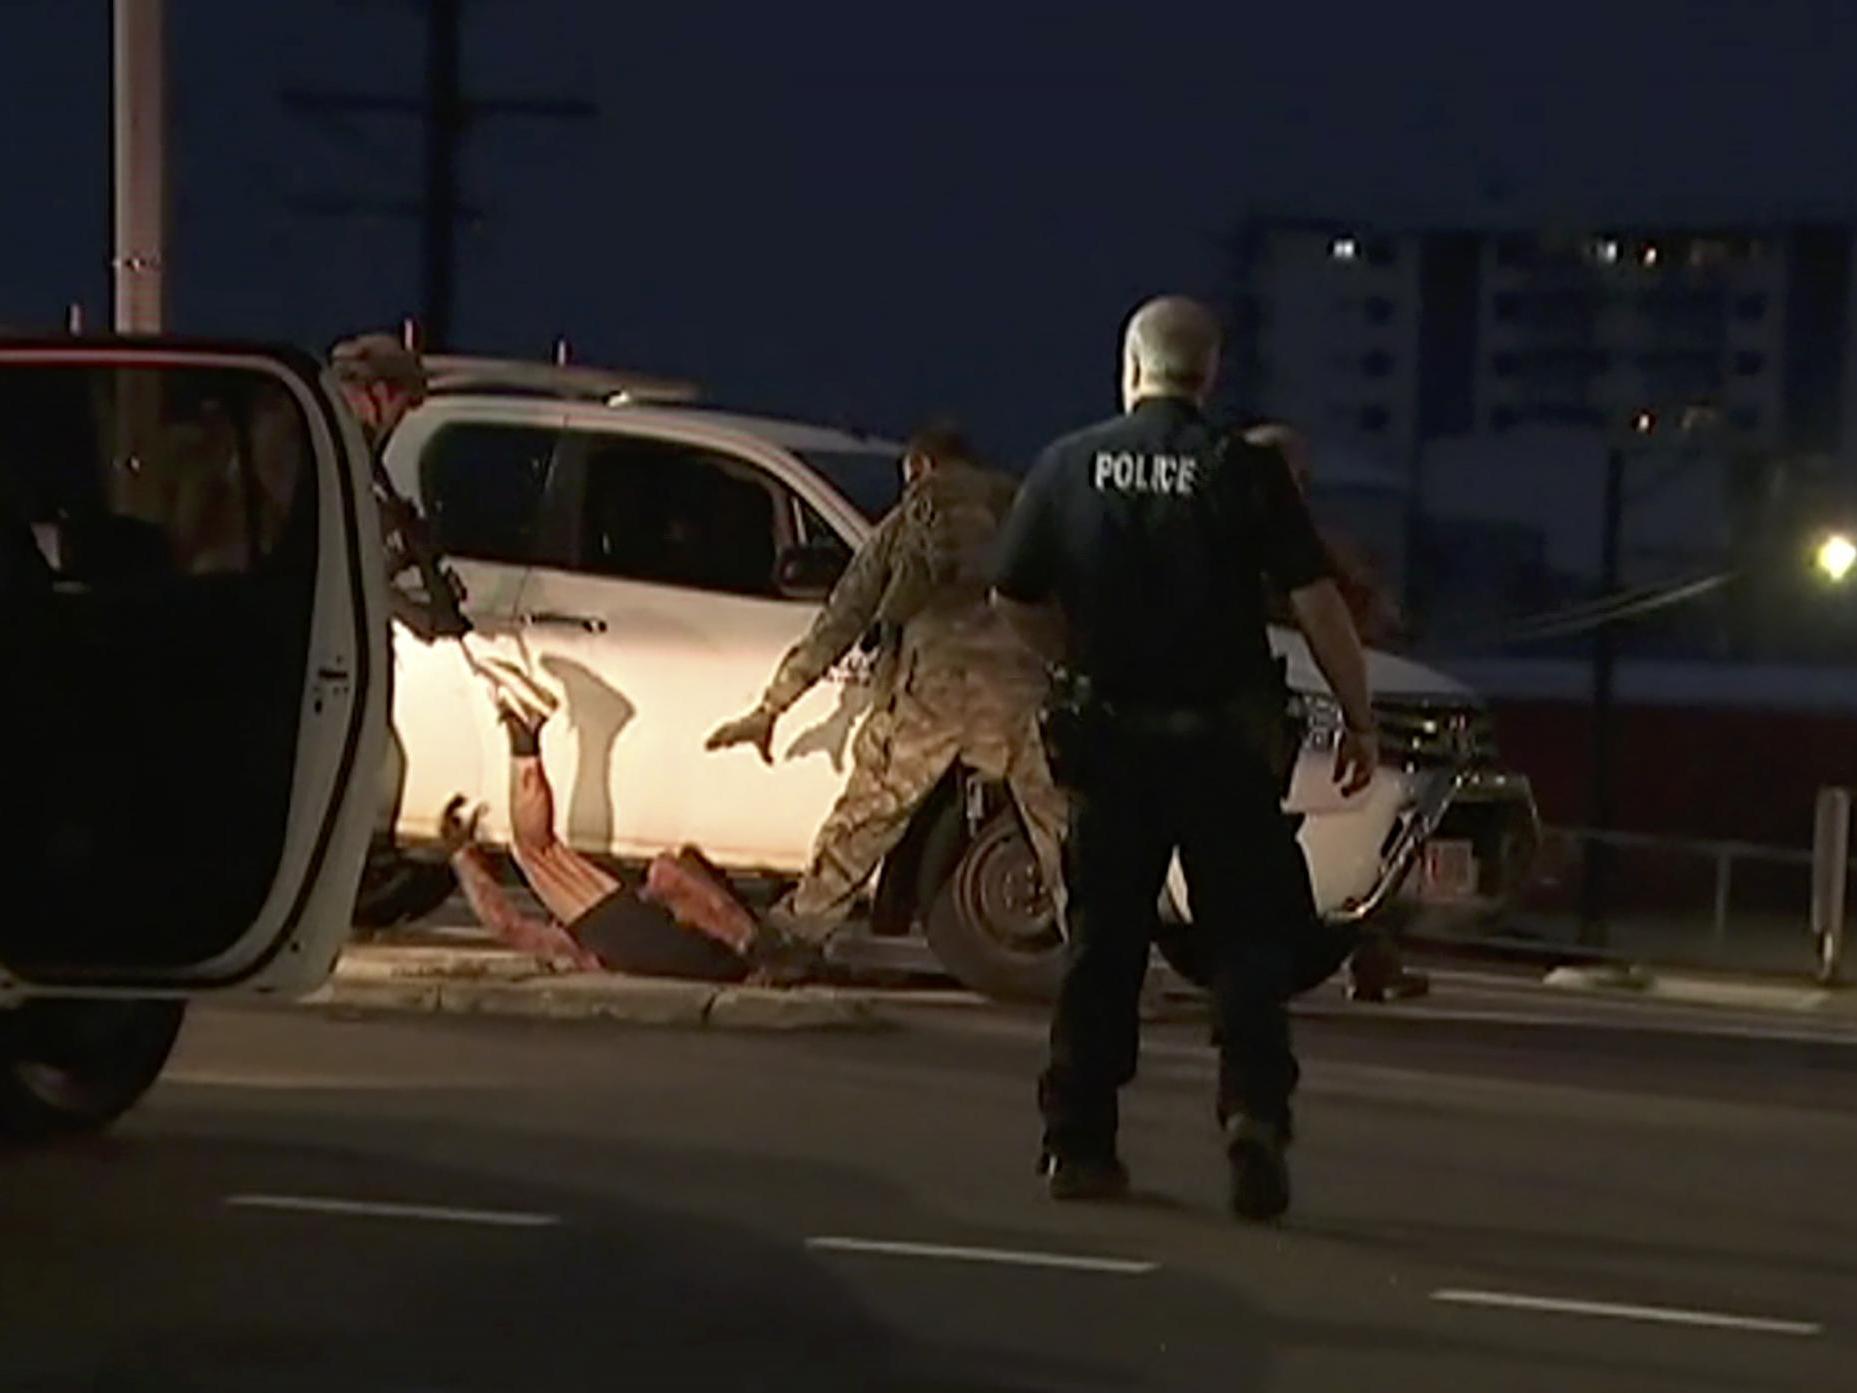 In this image made from video, police proceed to apprehend a suspect on the ground next to a white truck on Tuesday 4 June, in Darwin, Australia.